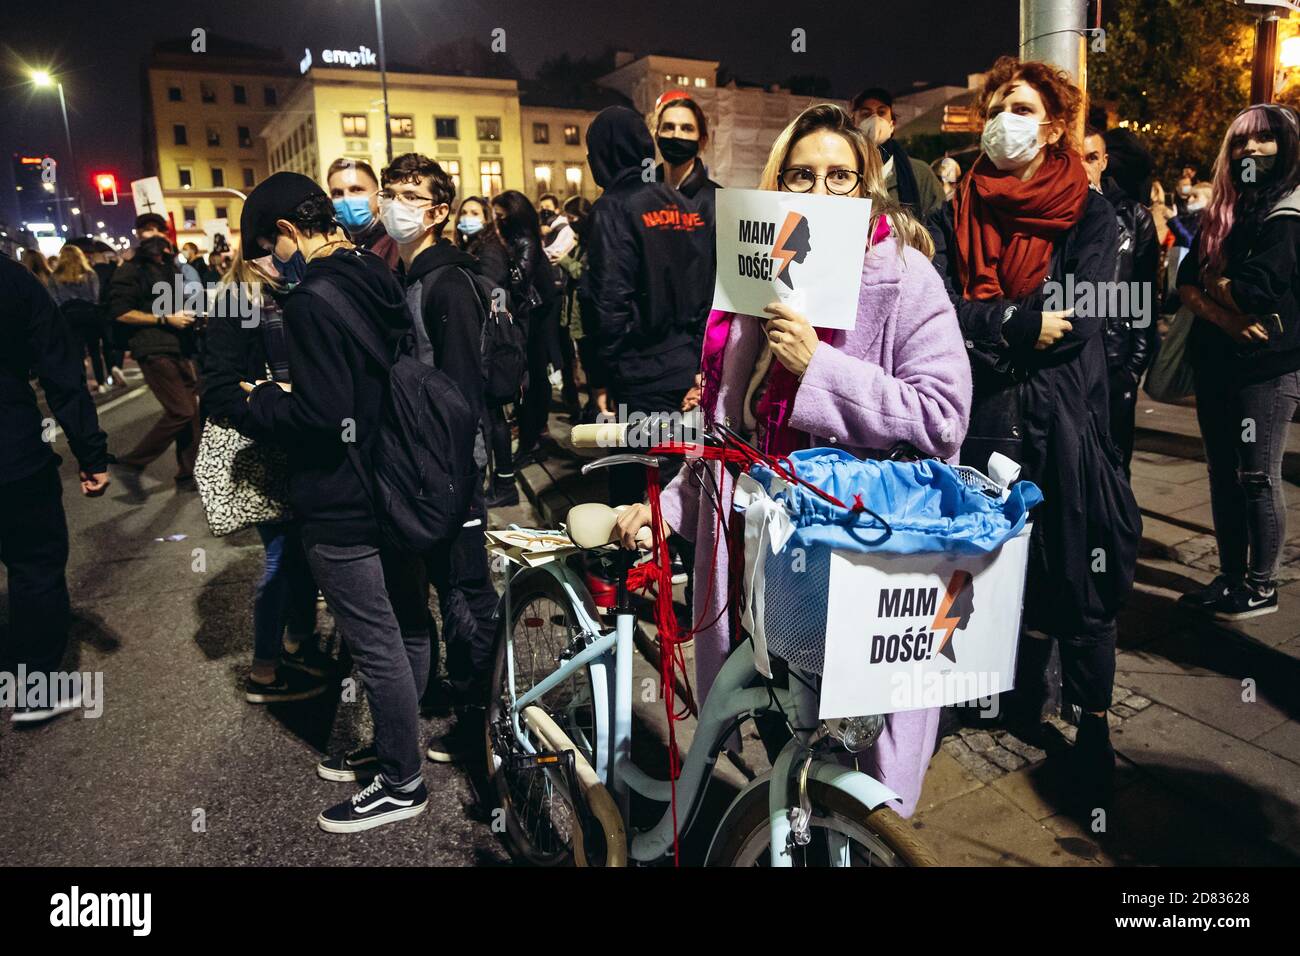 Warsaw, Poland - October 26, 2020: Pro choice supporters blocked the streets of the city during 5th day of protest against ruling that could lead to n Stock Photo